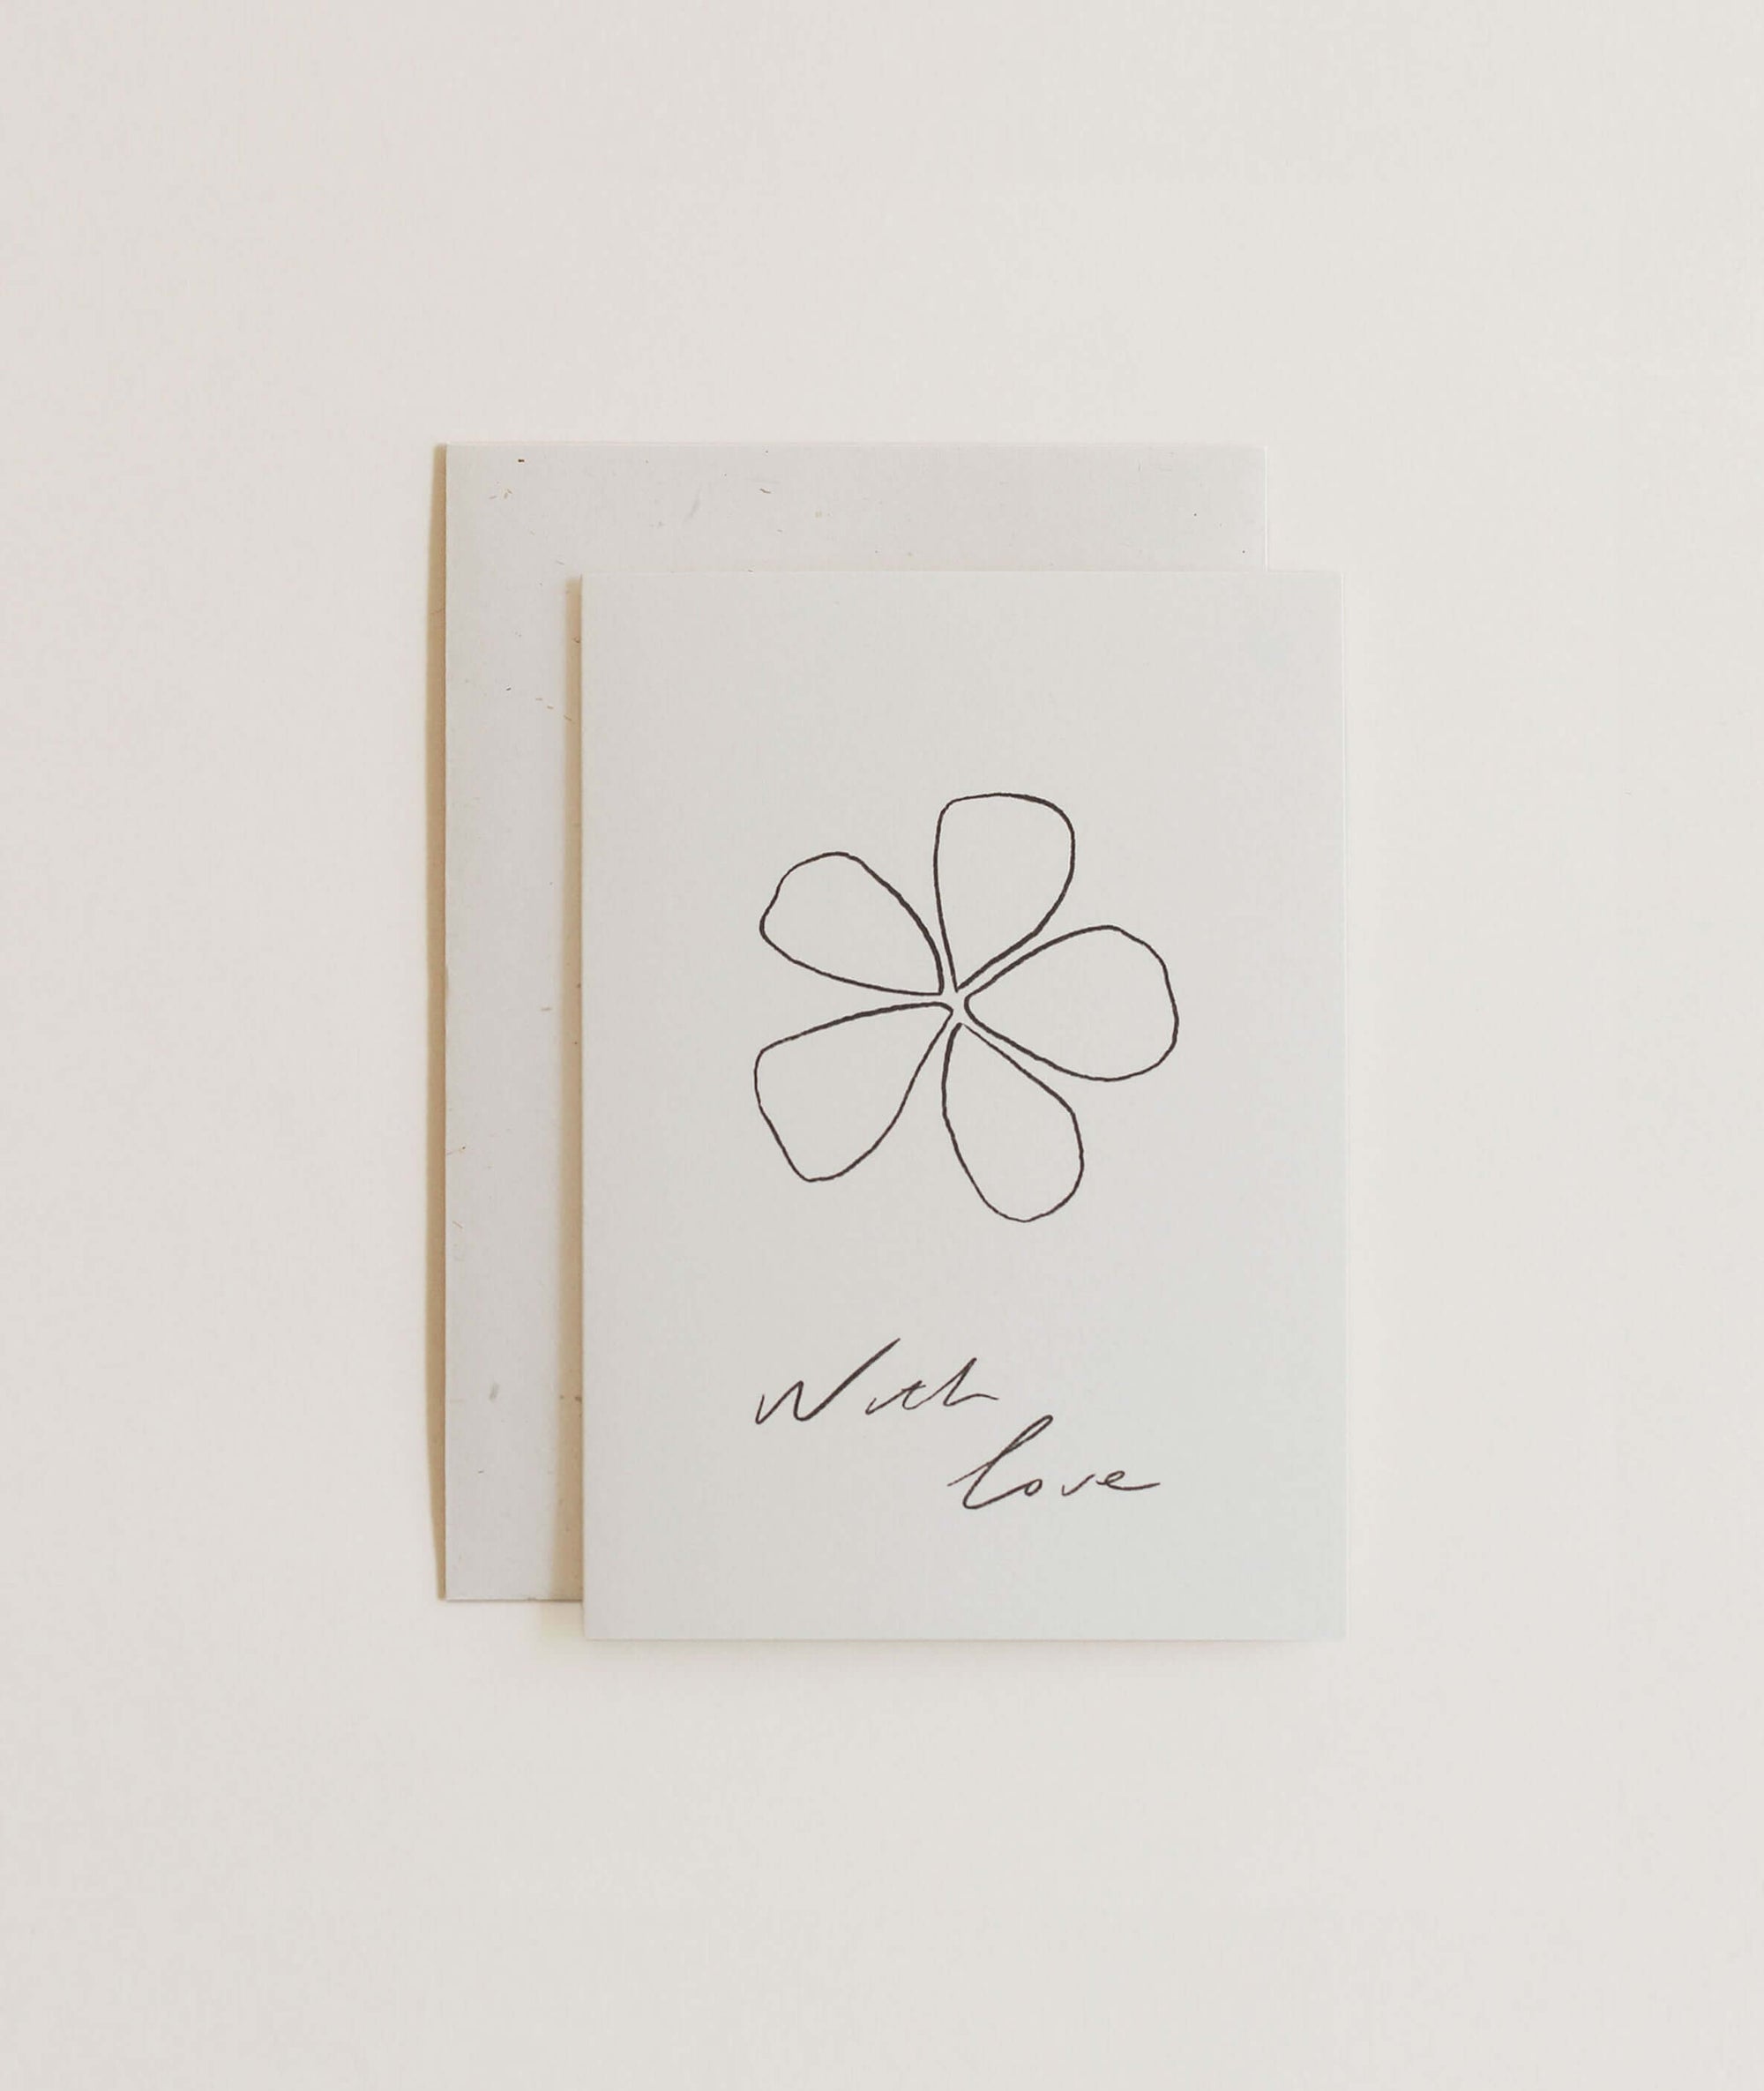 Greeting Card - The Hand Drawn Lettering Says &quot;With Love&quot; And A Hand Drawn Flower. 